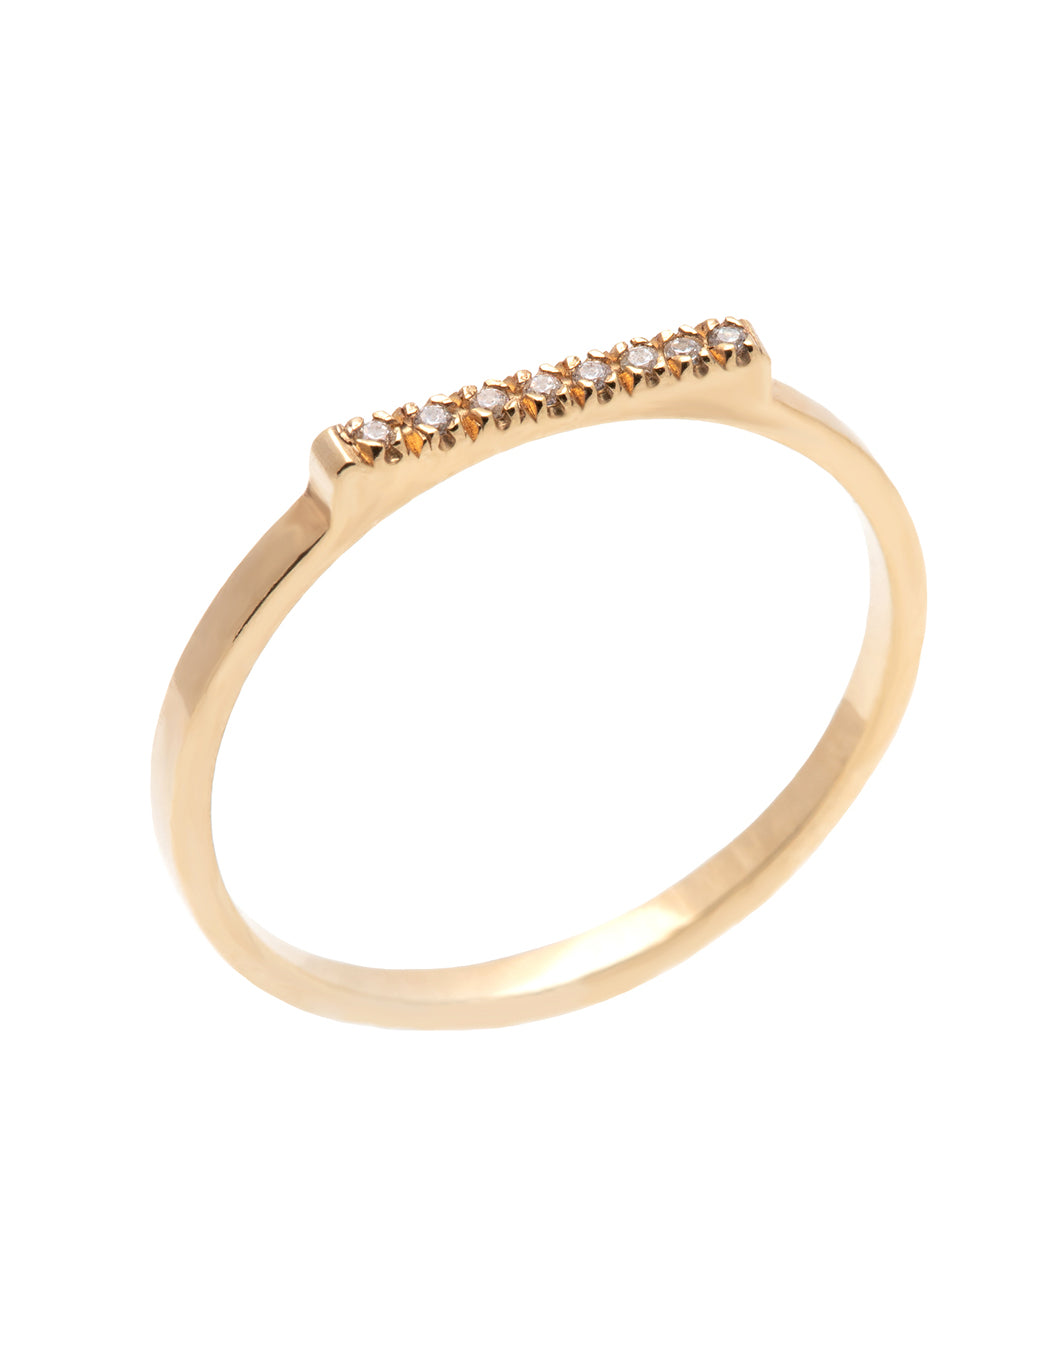 A delicate 14k yellow gold ring with a flat top set nine brilliant cut white diamonds, 0.01 carat each. 